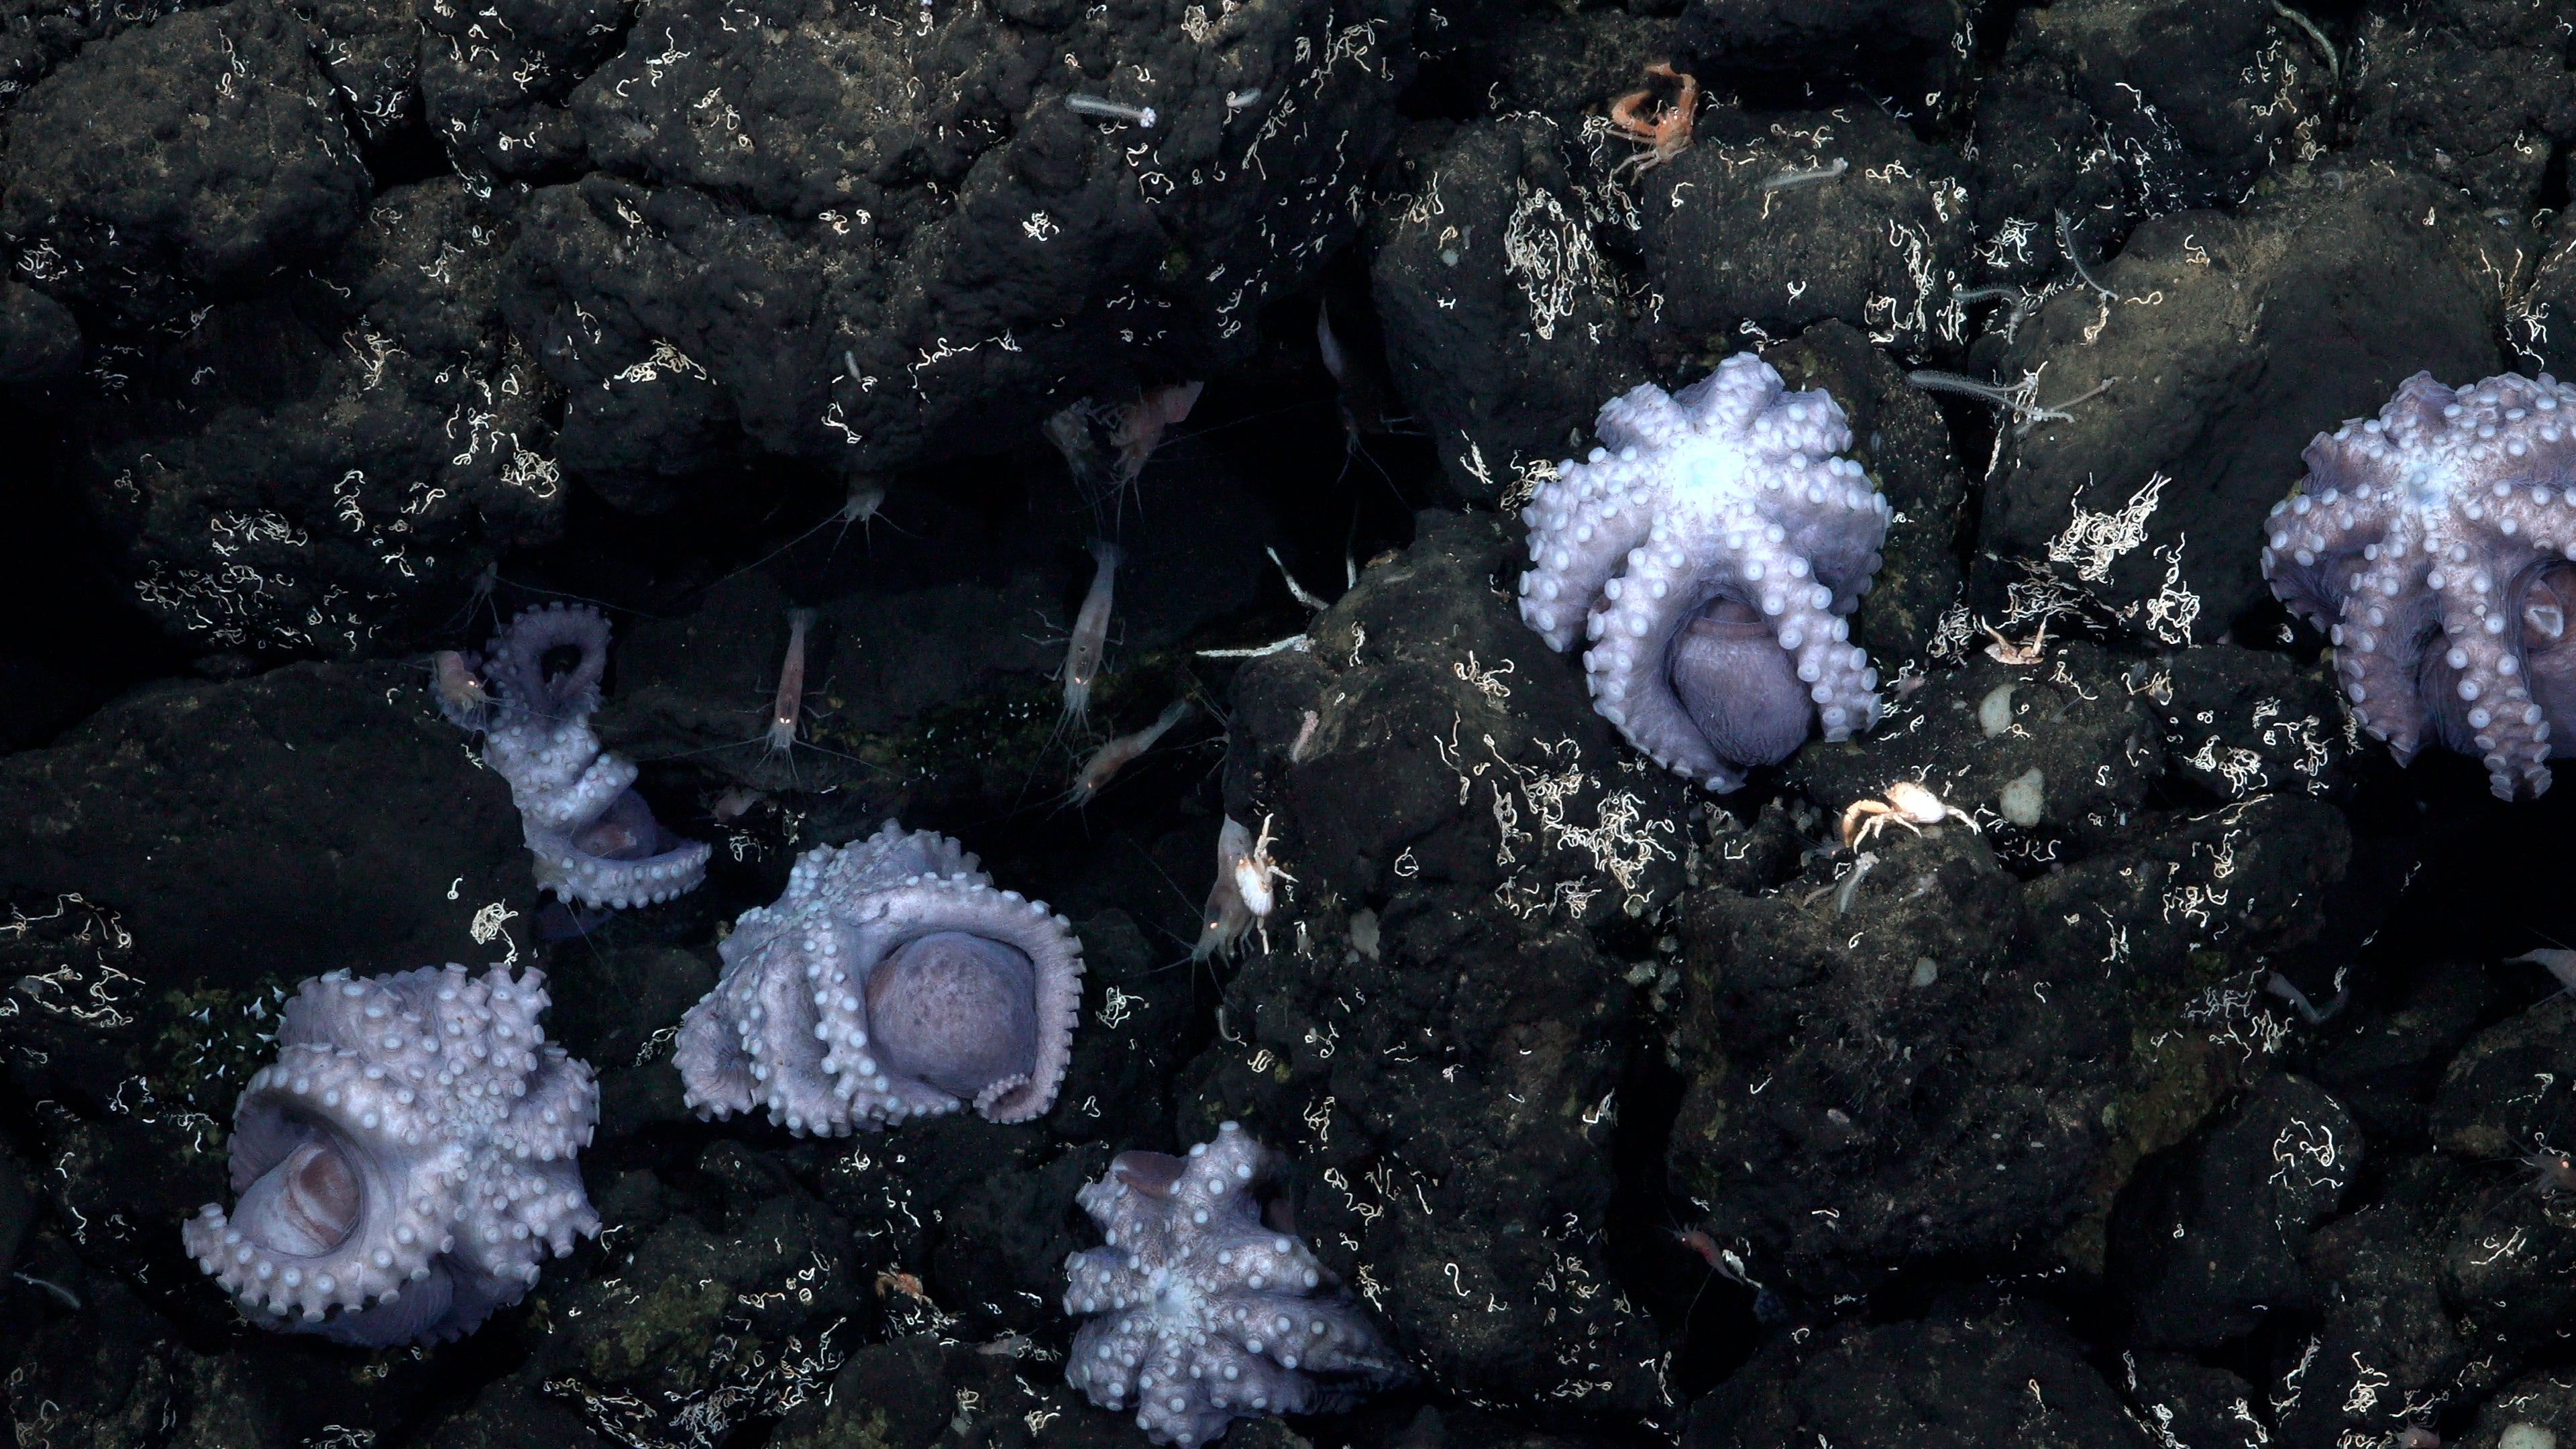 This is the second site that scientists found brooding octopuses gathering to protect their eggs. (Image: Schmidt Ocean Institute)